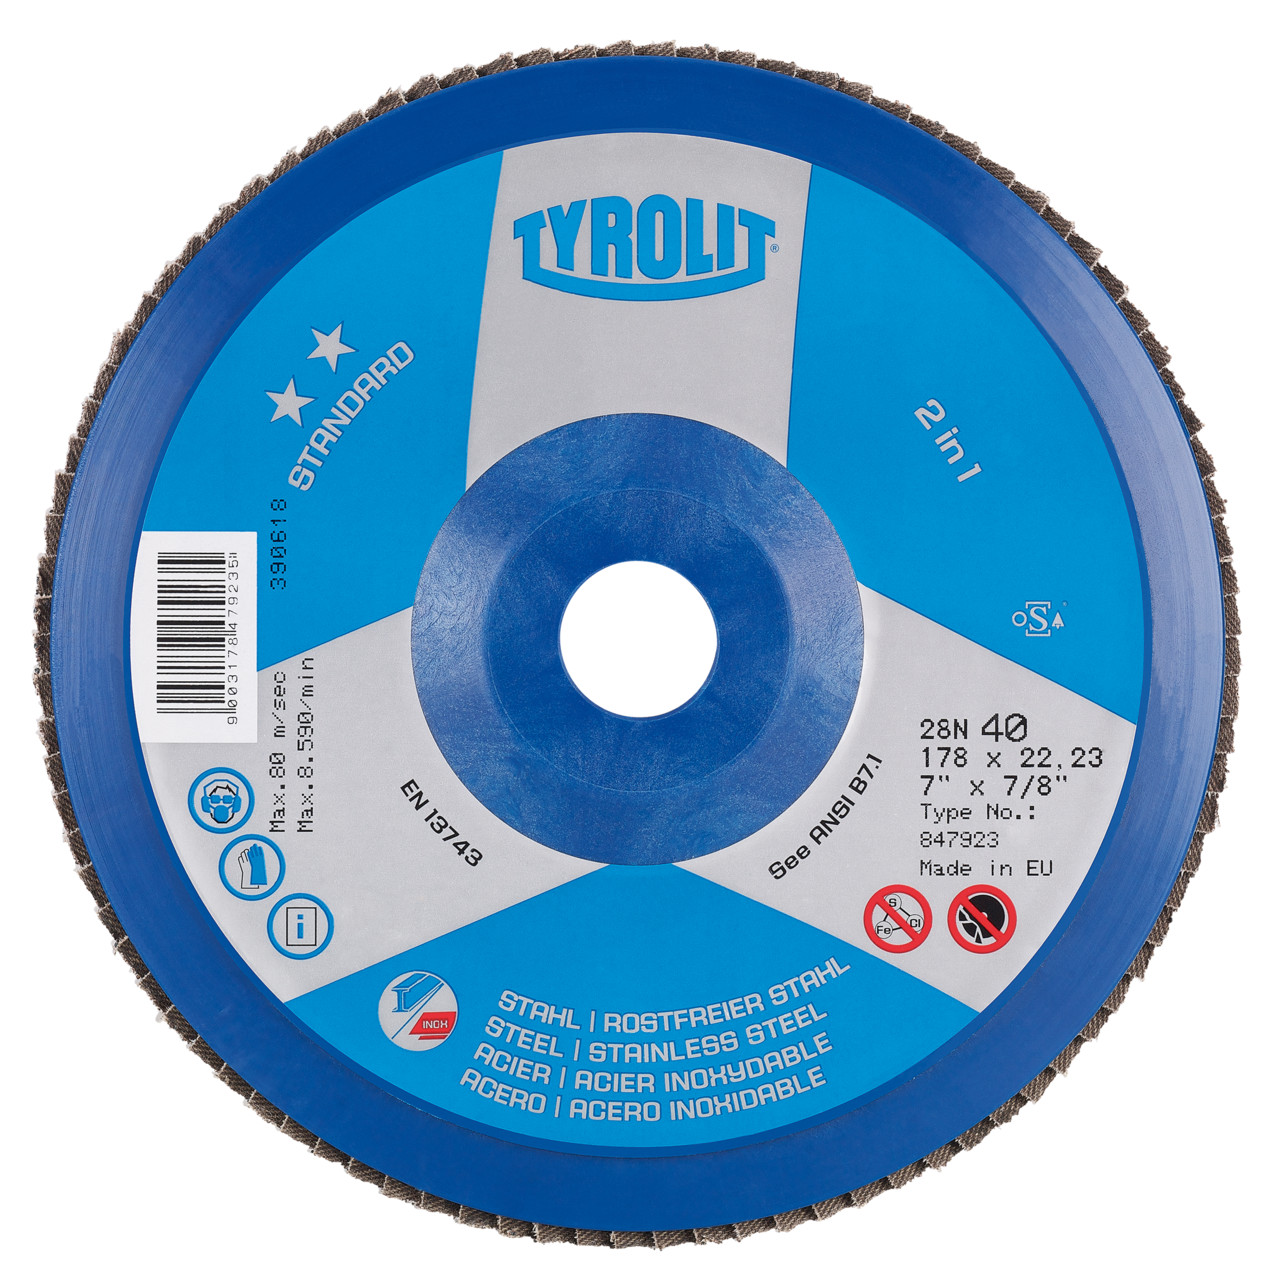 Tyrolit Serrated lock washer DxH 125x22.2 2in1 for steel and stainless steel, P60, shape: 28N - straight version (plastic carrier body), Art. 847925